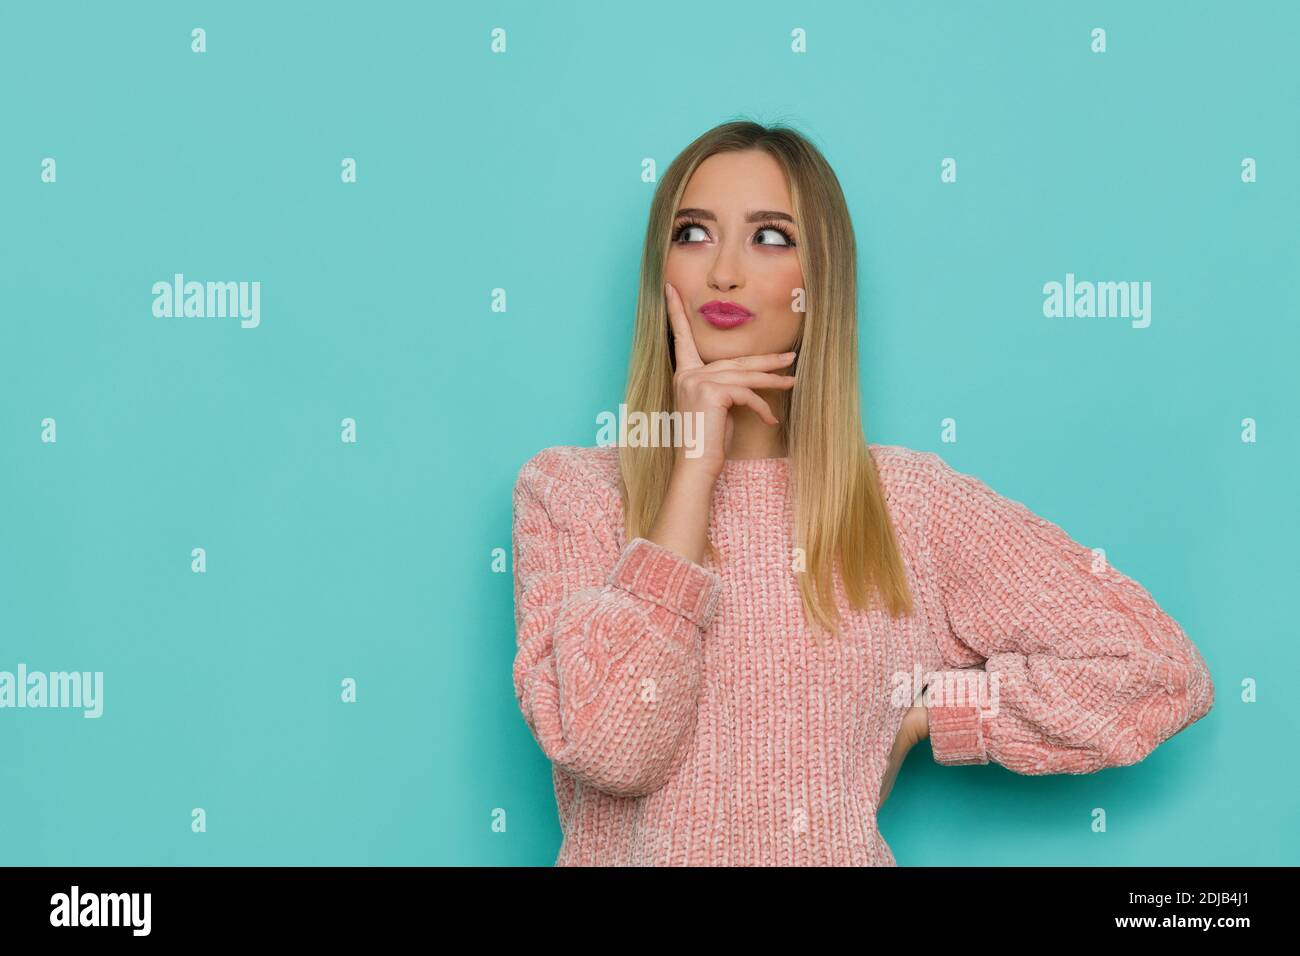 Excited young woman in pink sweater is holding hand on chin, grimacing and looking at the side. Waist up studio shot on turquoise background. Stock Photo